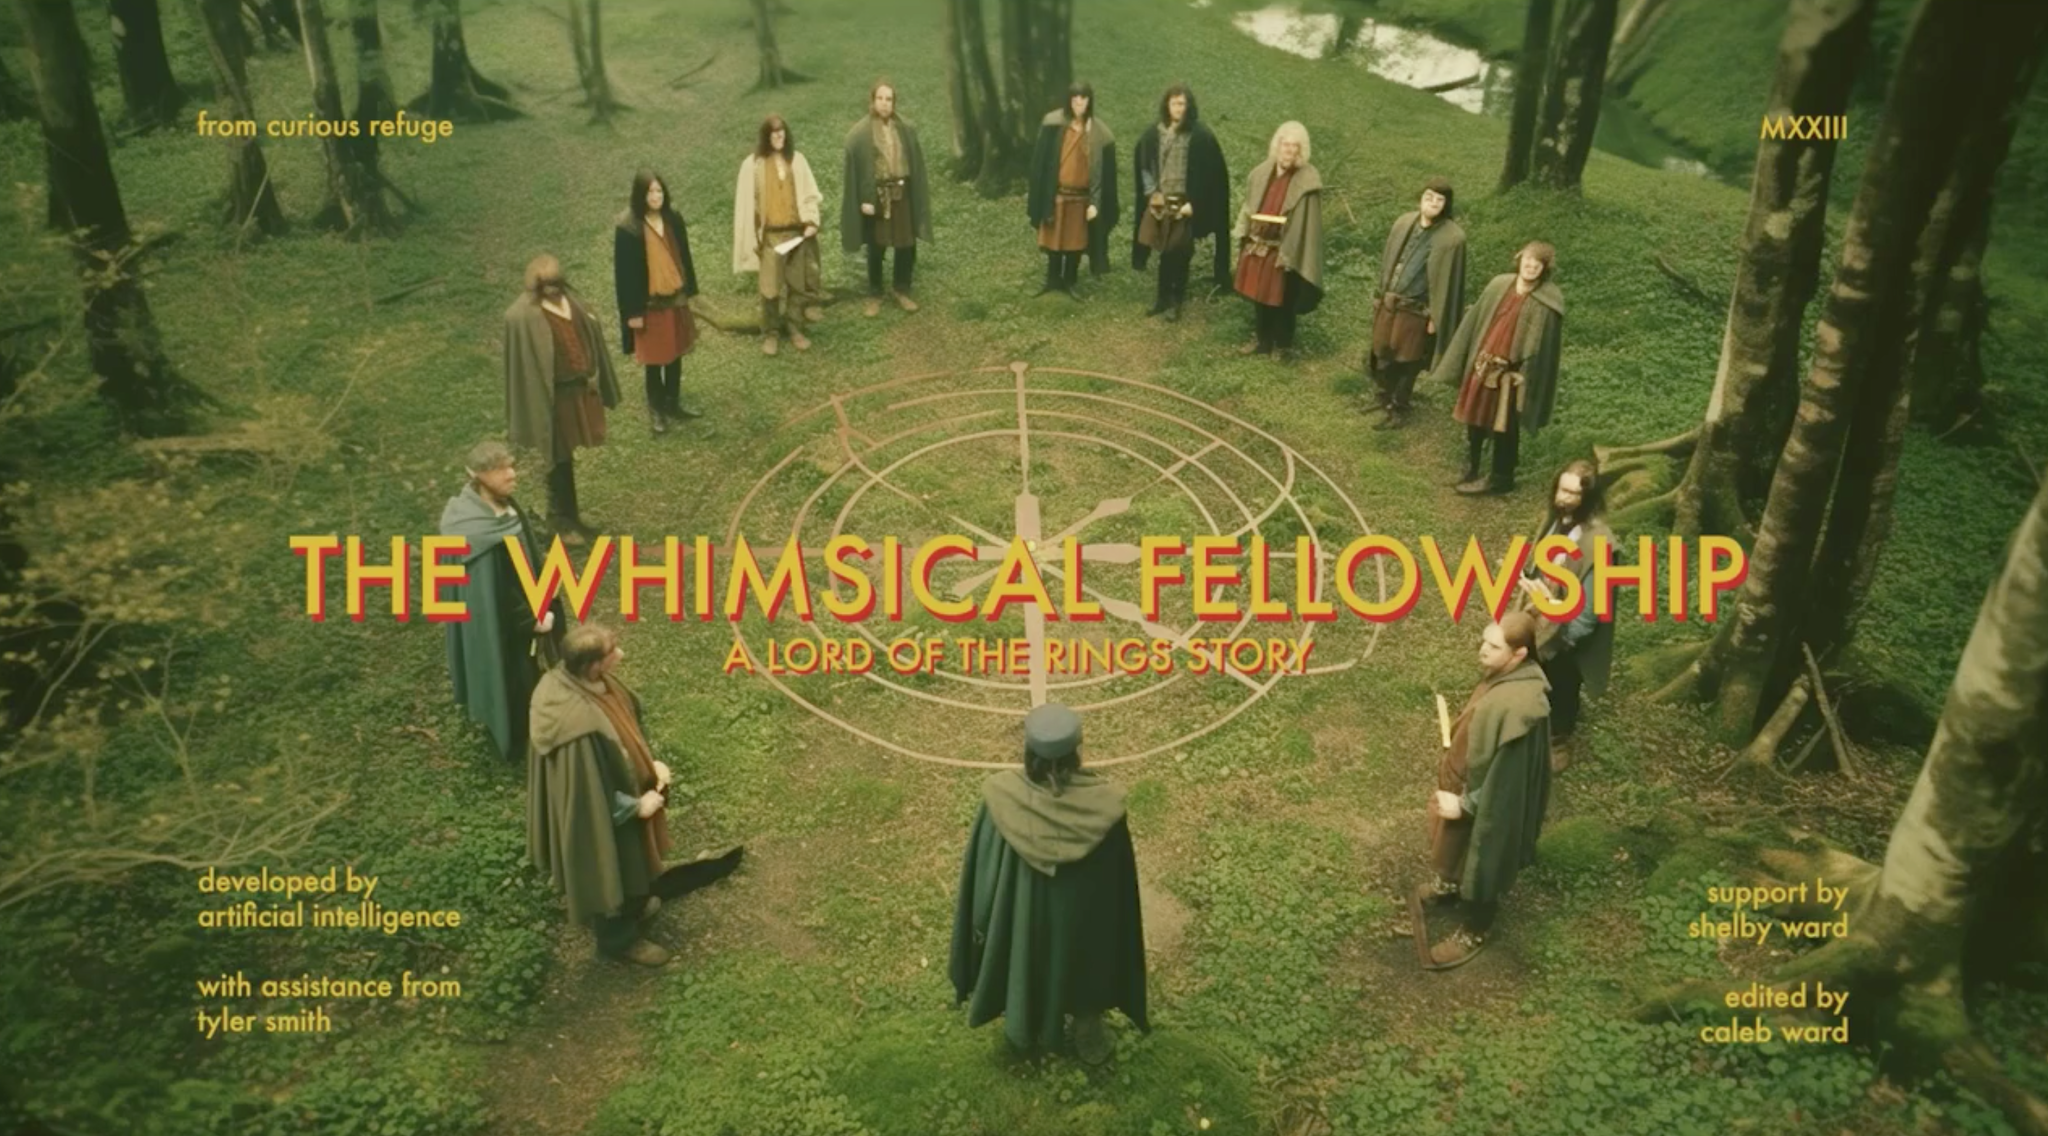 Watch an AI trailer for Wes Anderson's 'Lord of the Rings